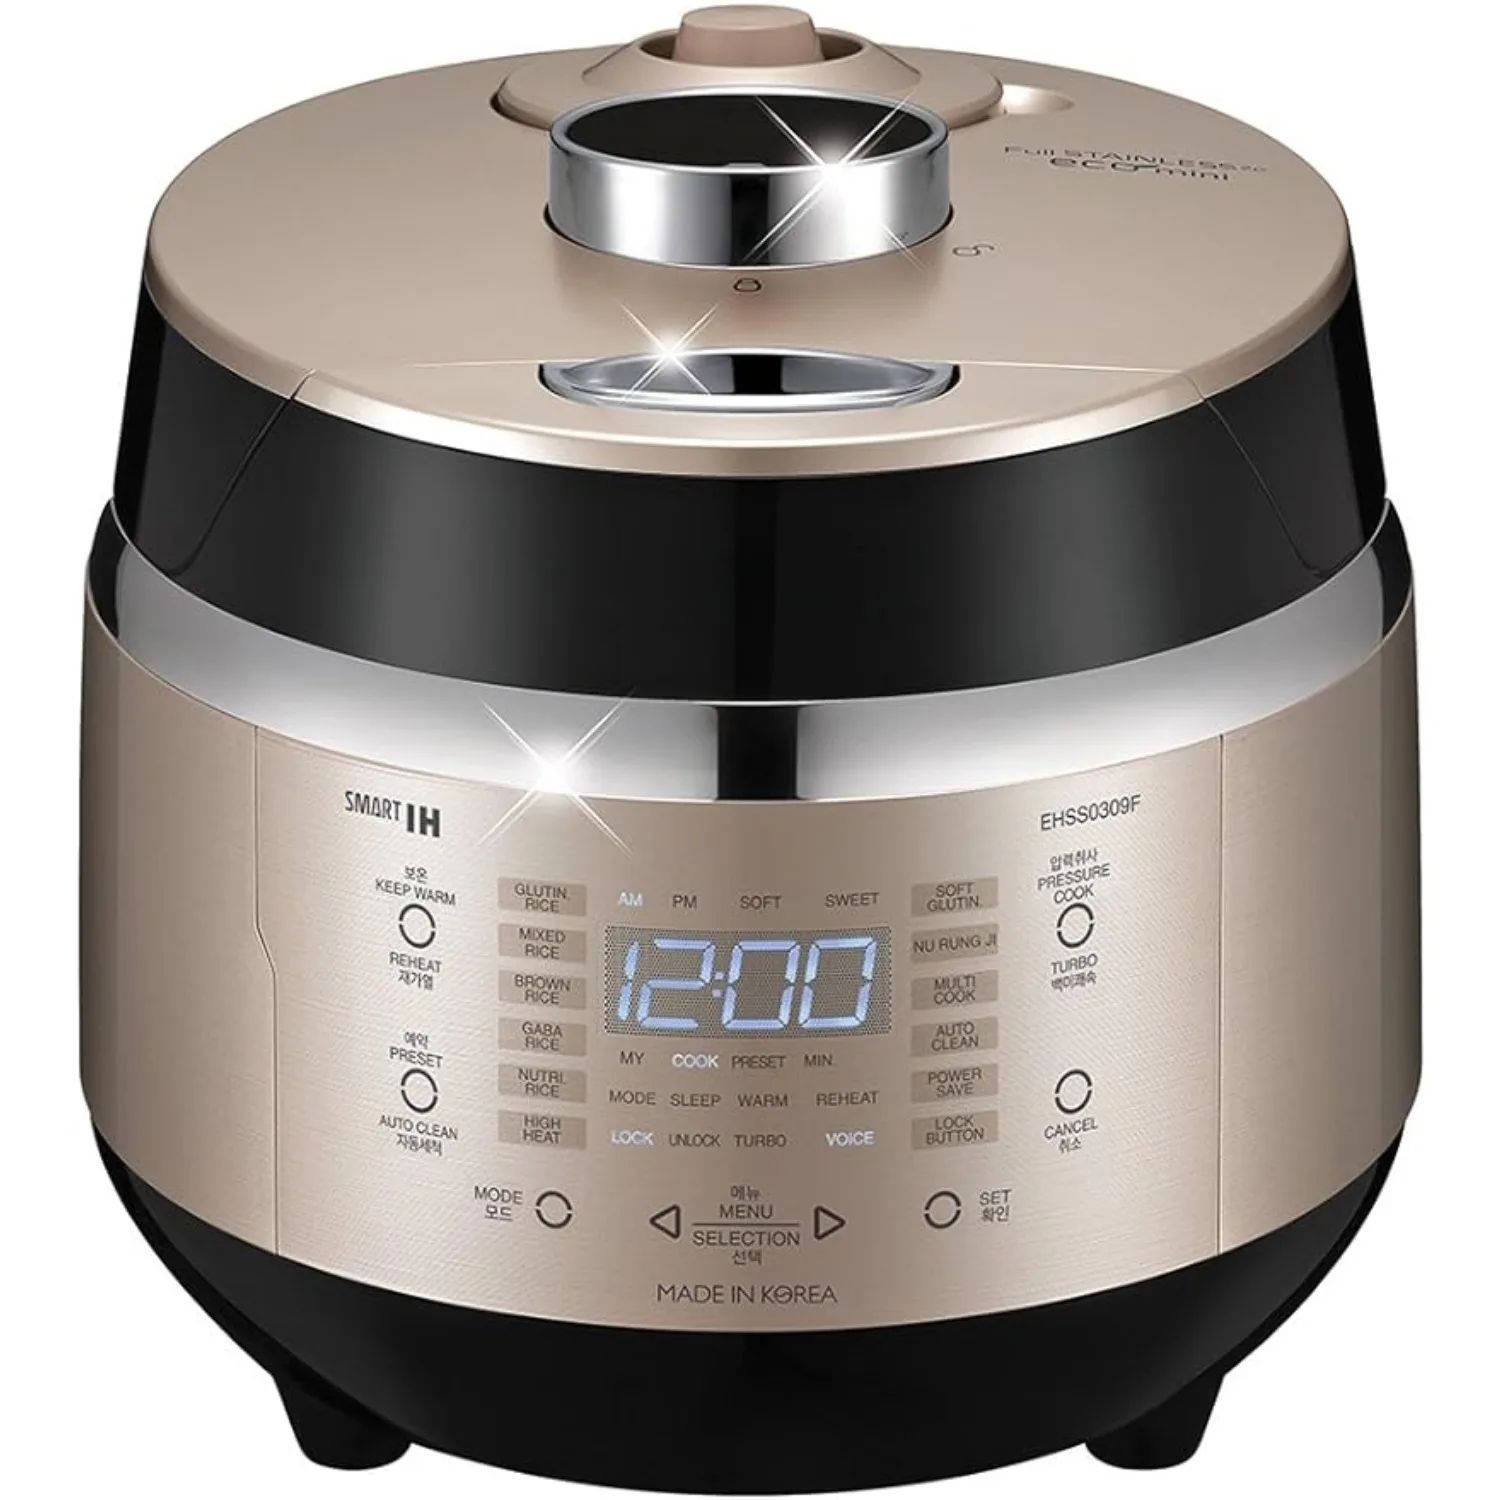 

Induction Heating Pressure Rice Cooker | 15 Menu Options, Auto-Clean, Voice Guide, Made in Korea | Gold,11"D x 15"W x 10"H